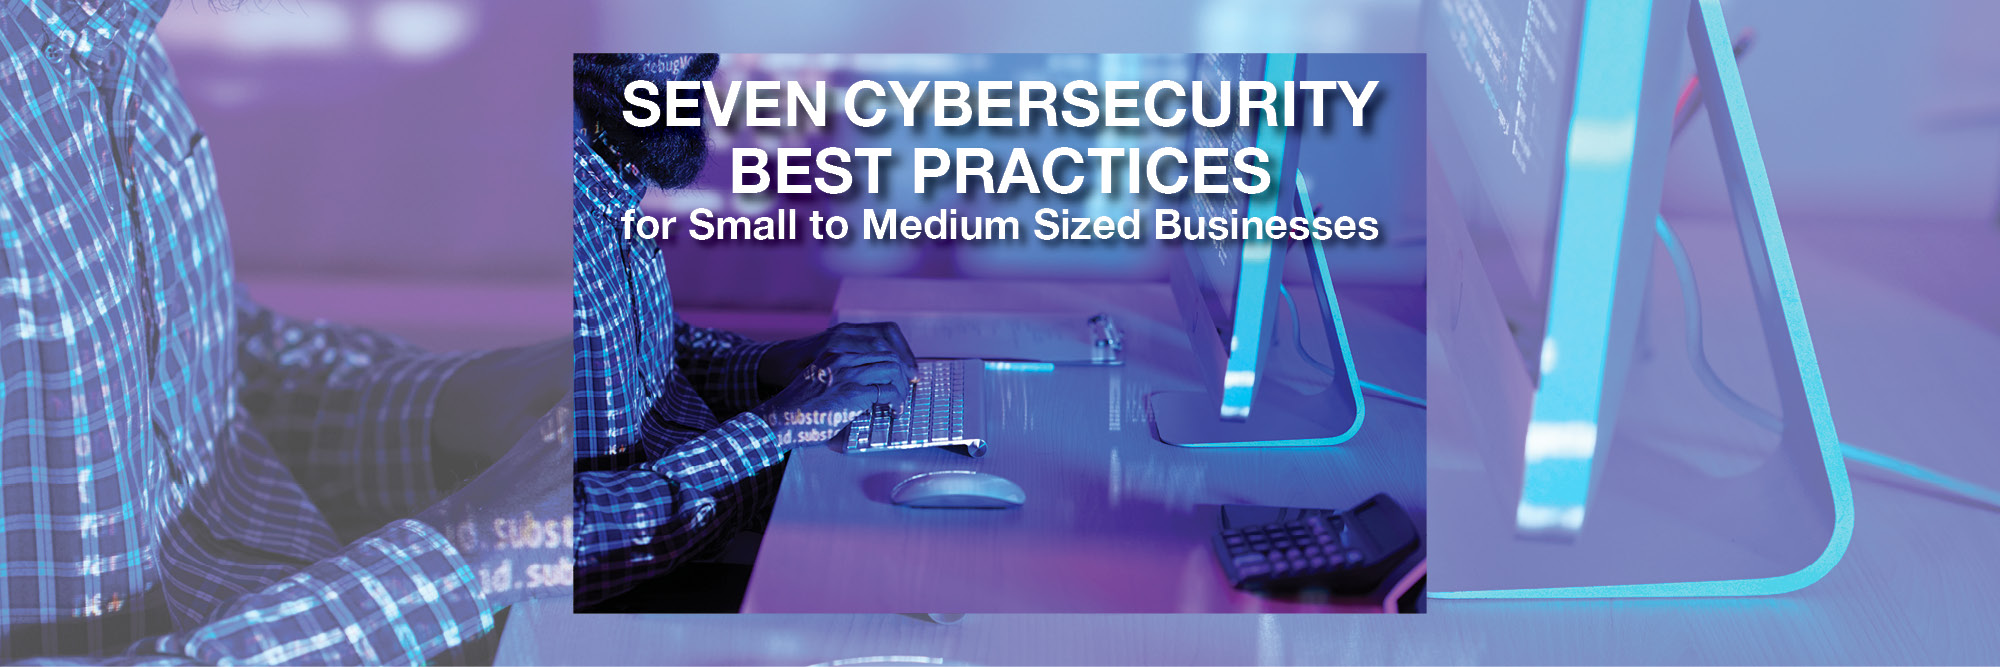 Seven Cybersecurity Best Practices for Small to Medium Sized Businesses